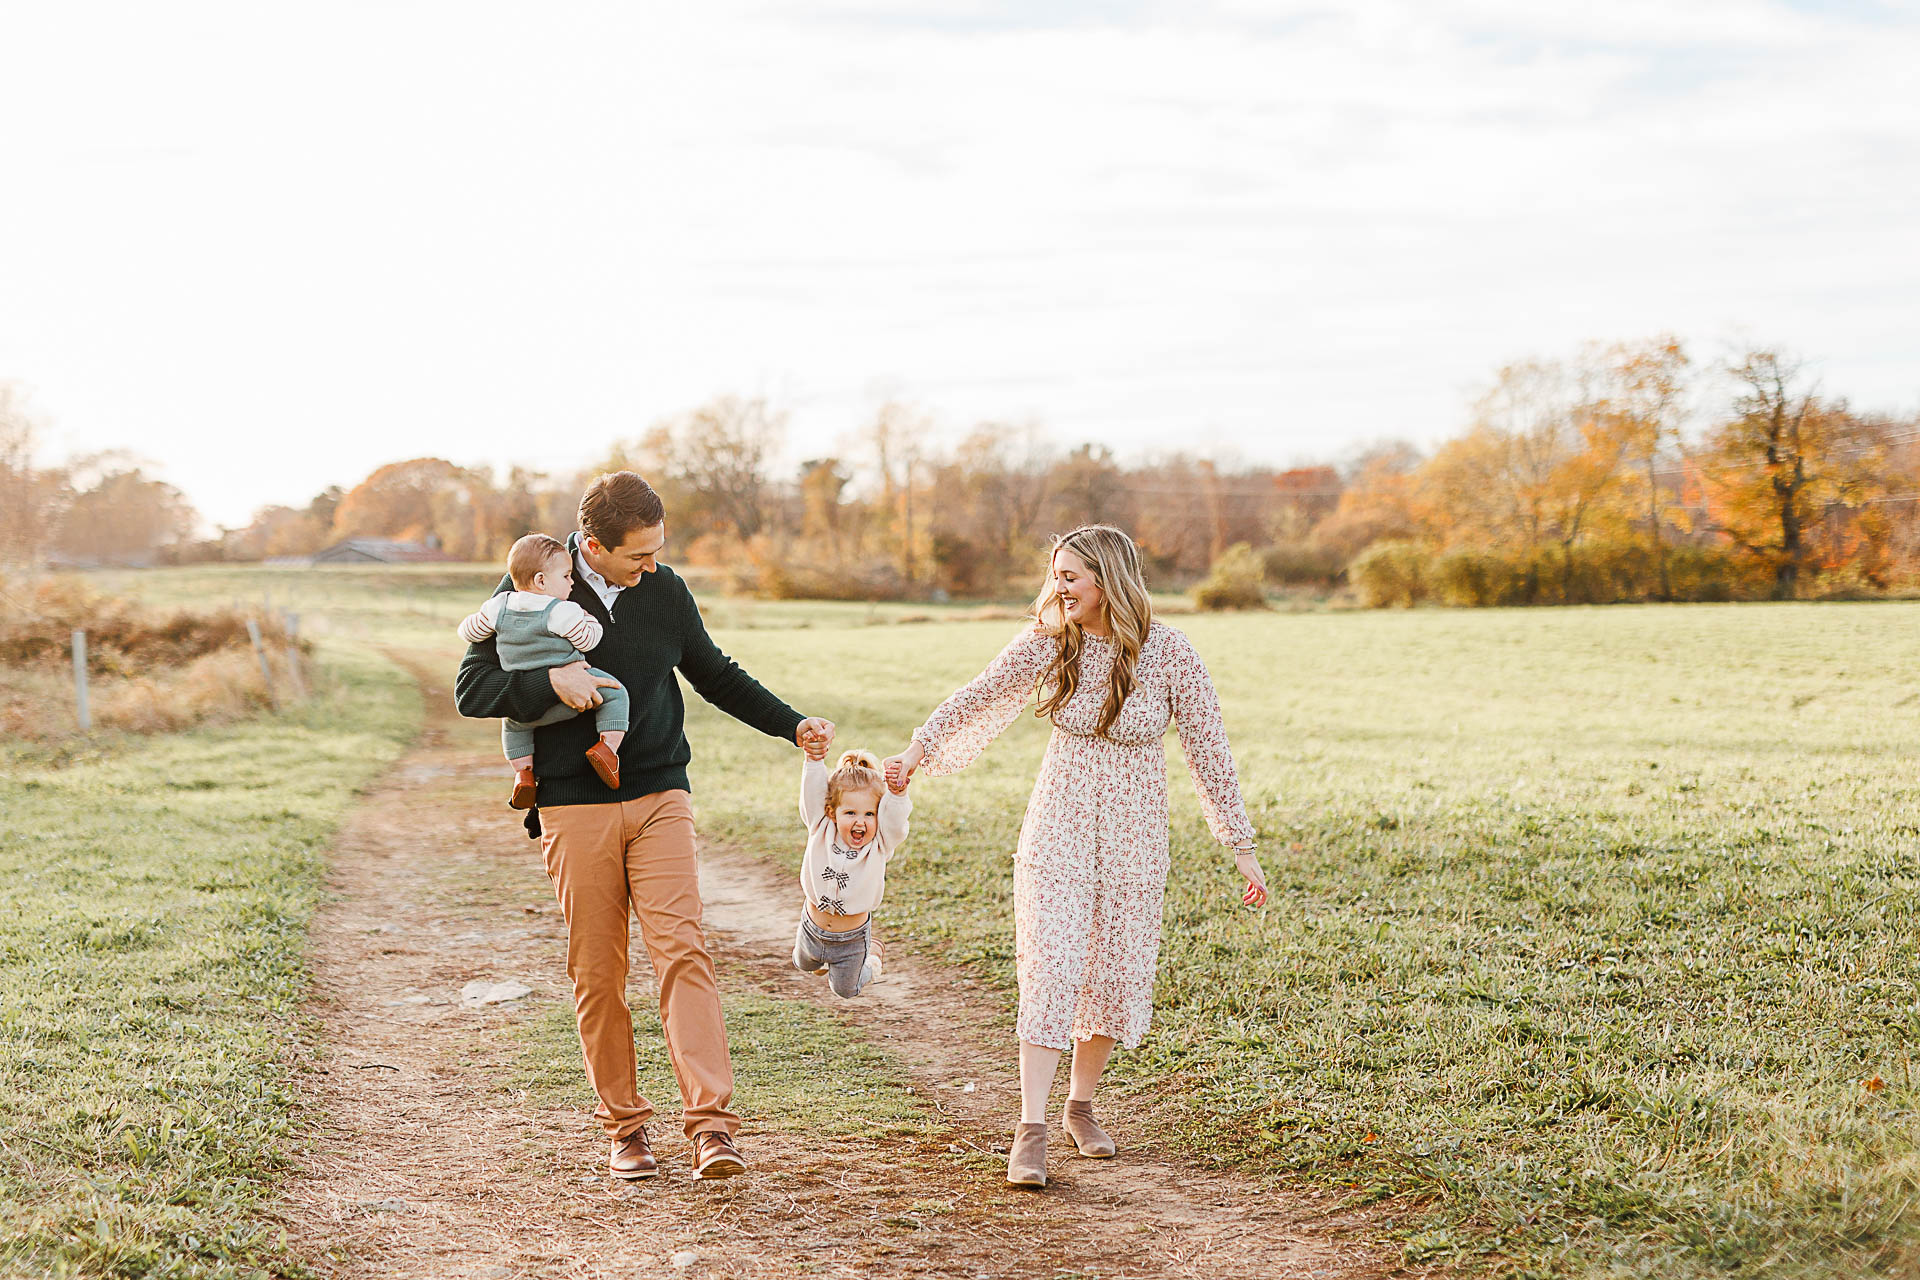 Photo by Hingham Family Photographer Christina Runnals | Family walking in field